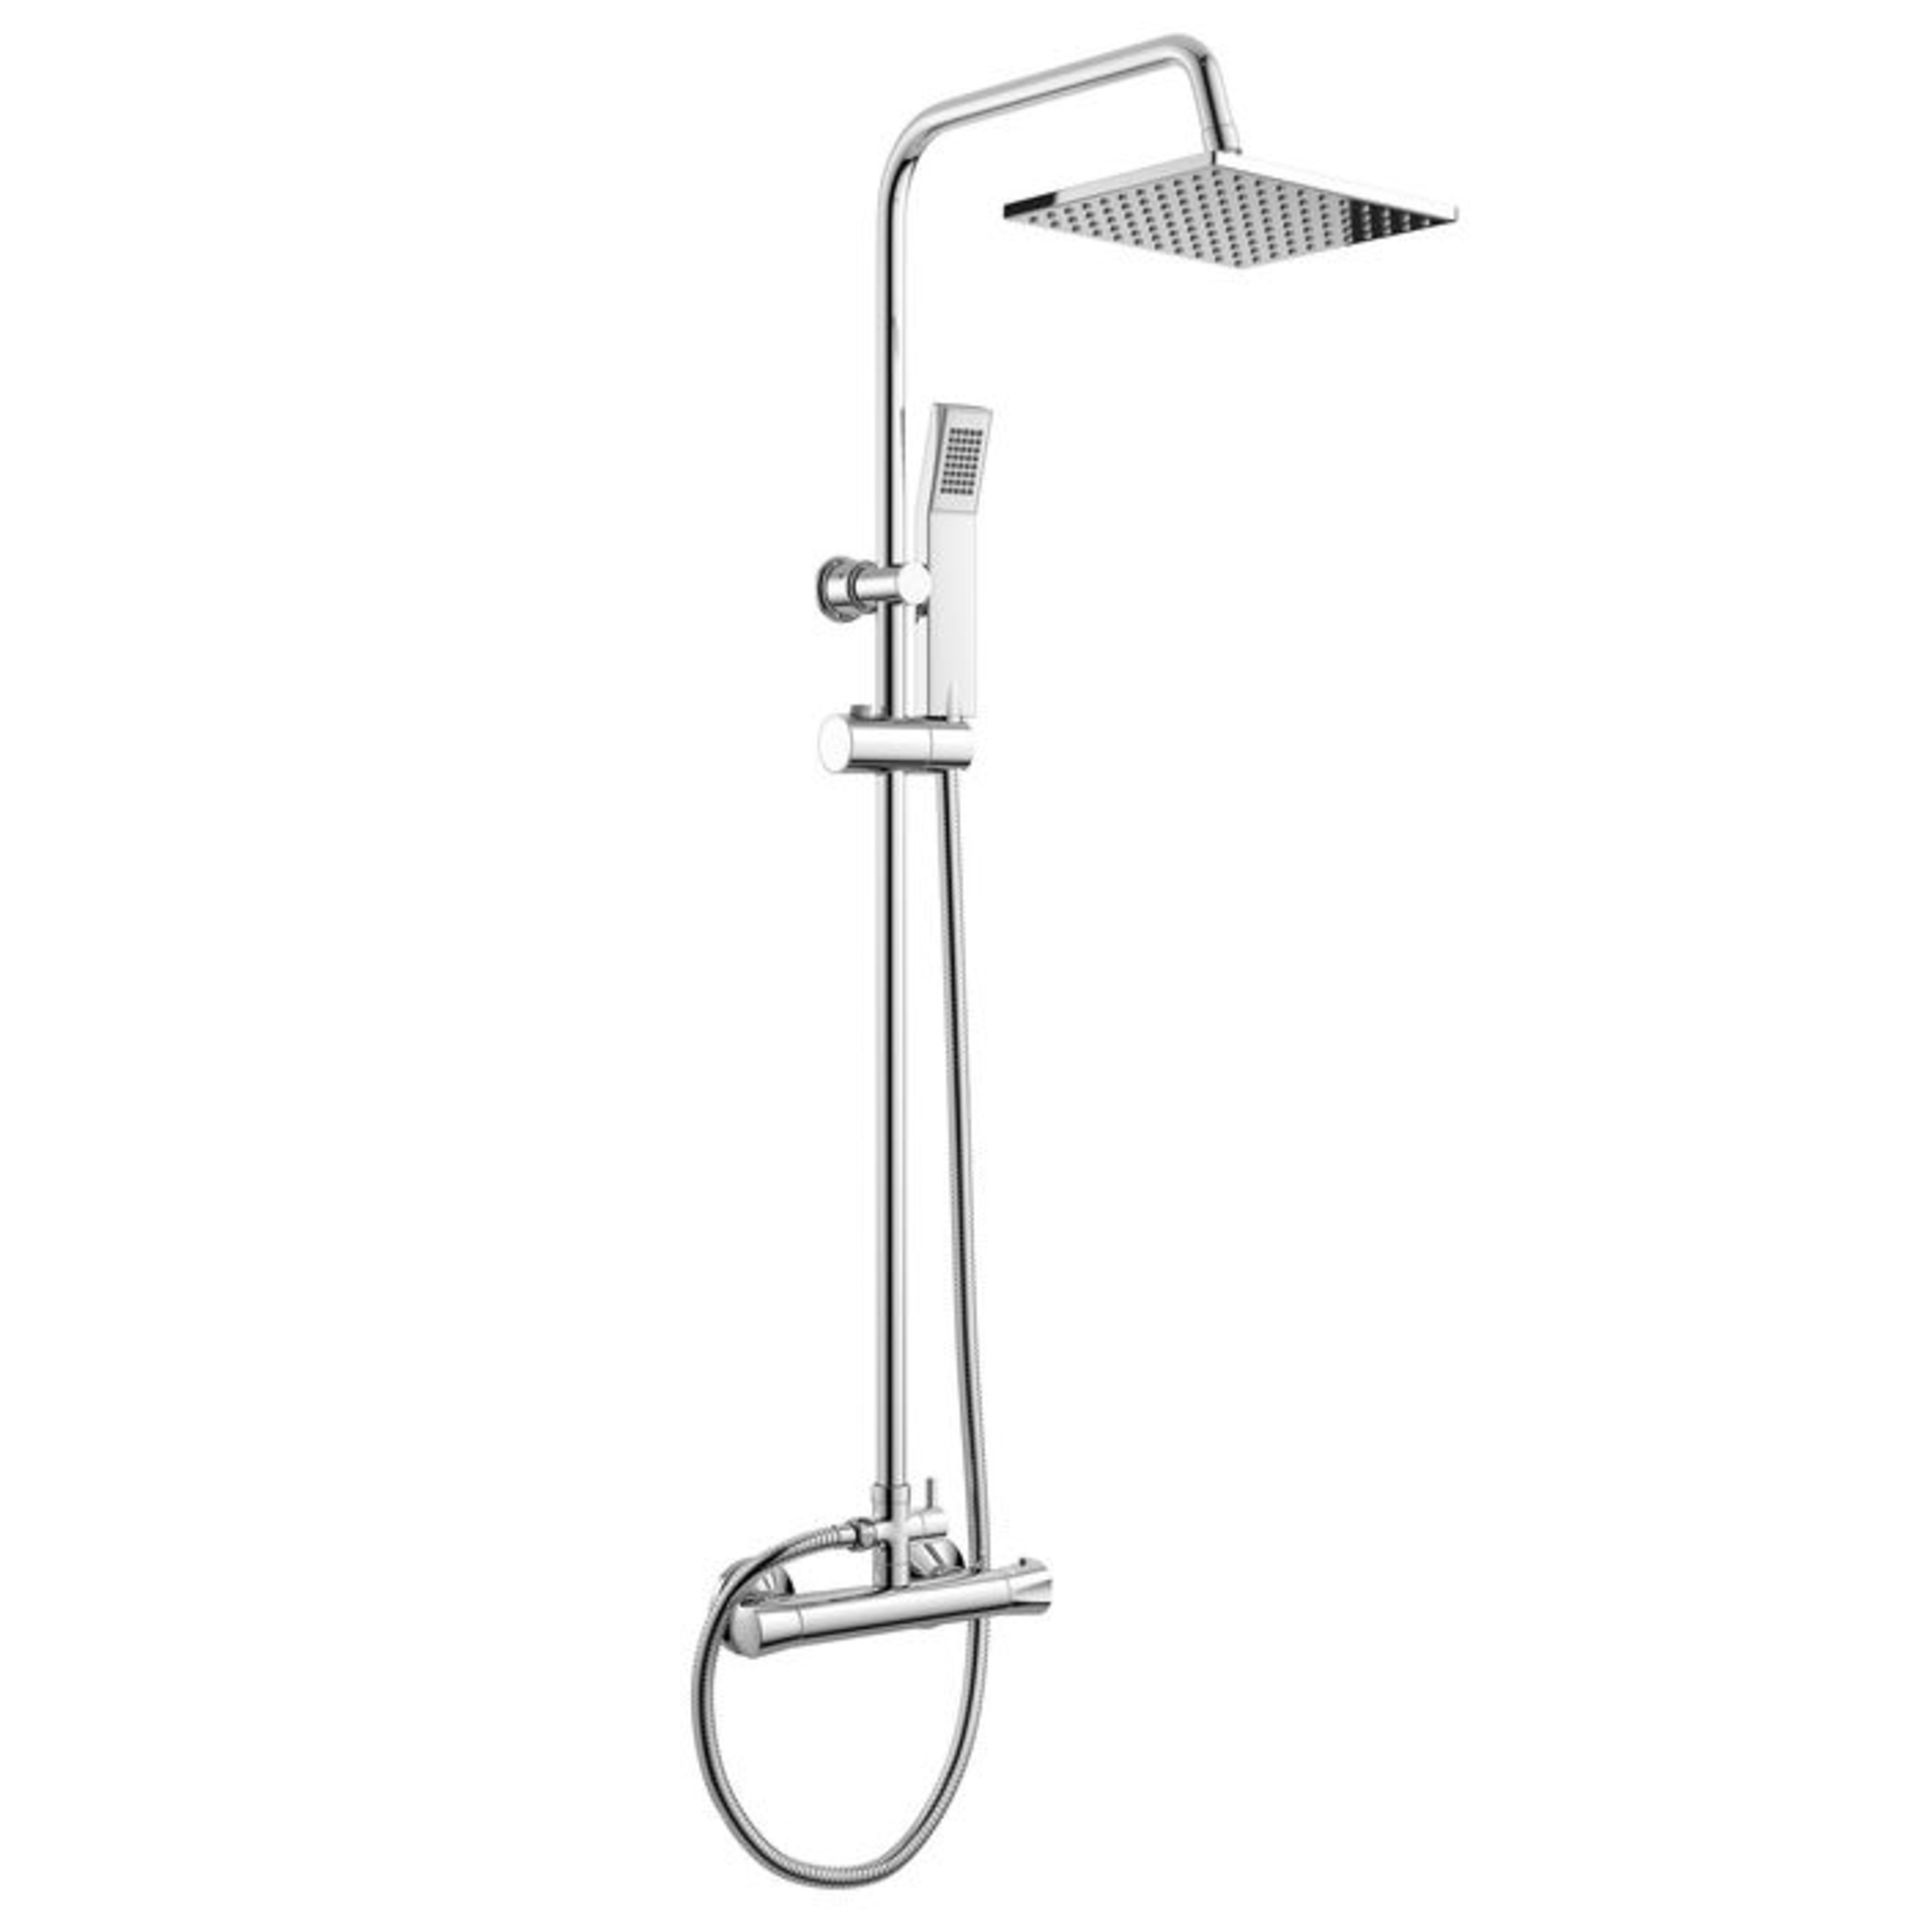 (E62) 200mm Square Head Thermostatic Exposed Shower Kit & Hand Held. We love this because it